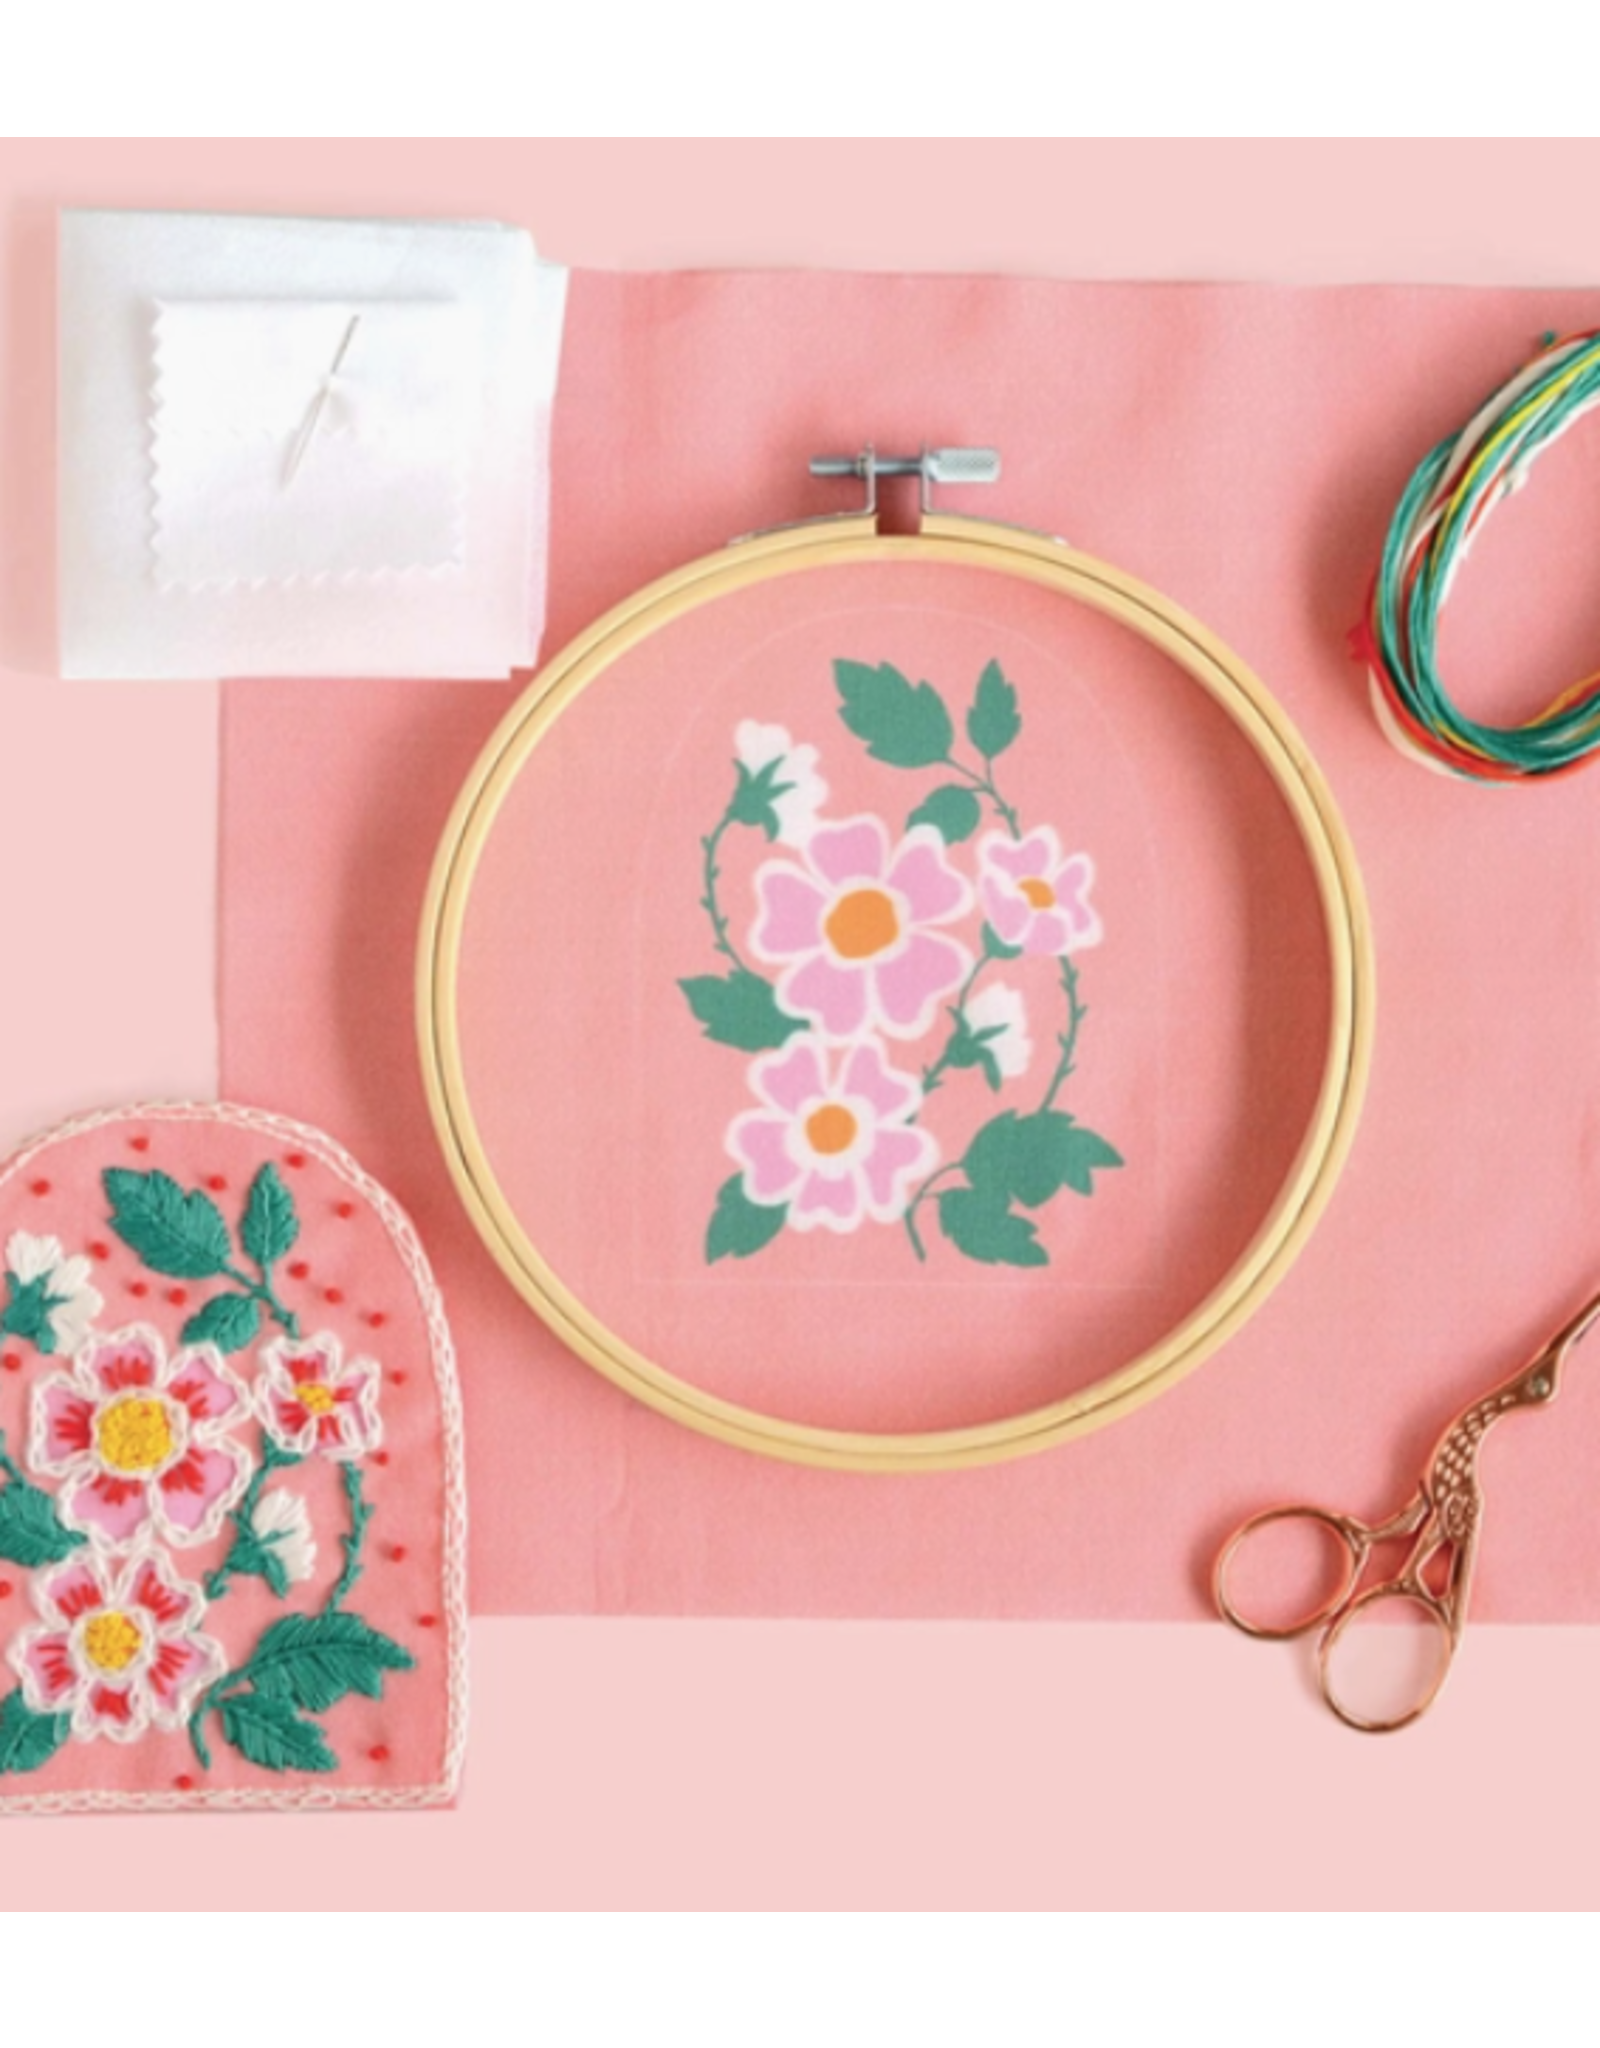 Antiquaria DIY Kit: Roses Embroidery Patch